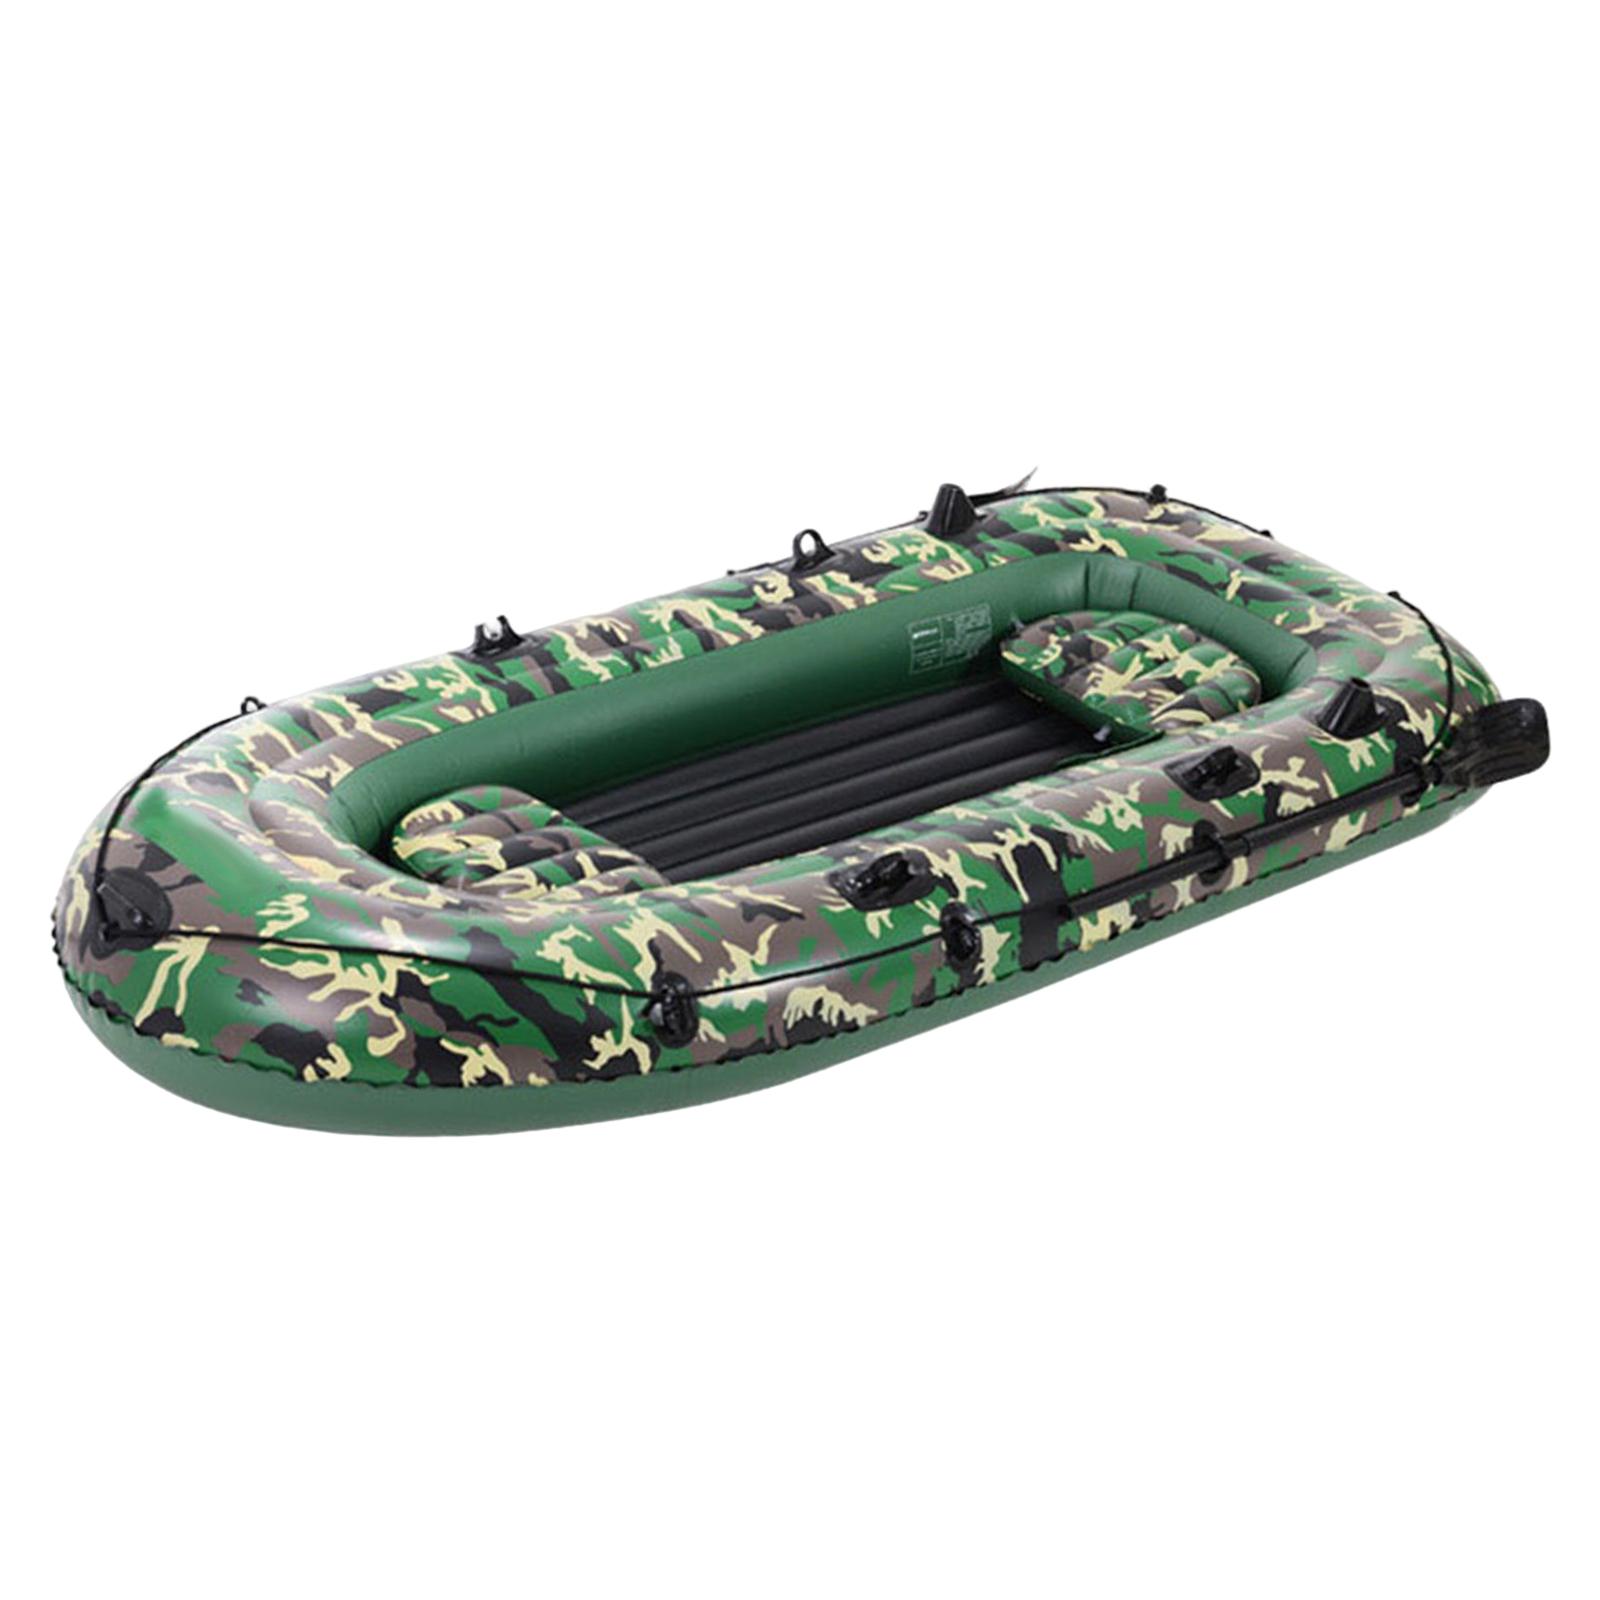 Inflatable Boat for Adults, 4 Person Inflatable Touring Kayak, Portable Fishing Kayak Raft with Paddles Hand Pump and Repair Patch - image 2 of 10